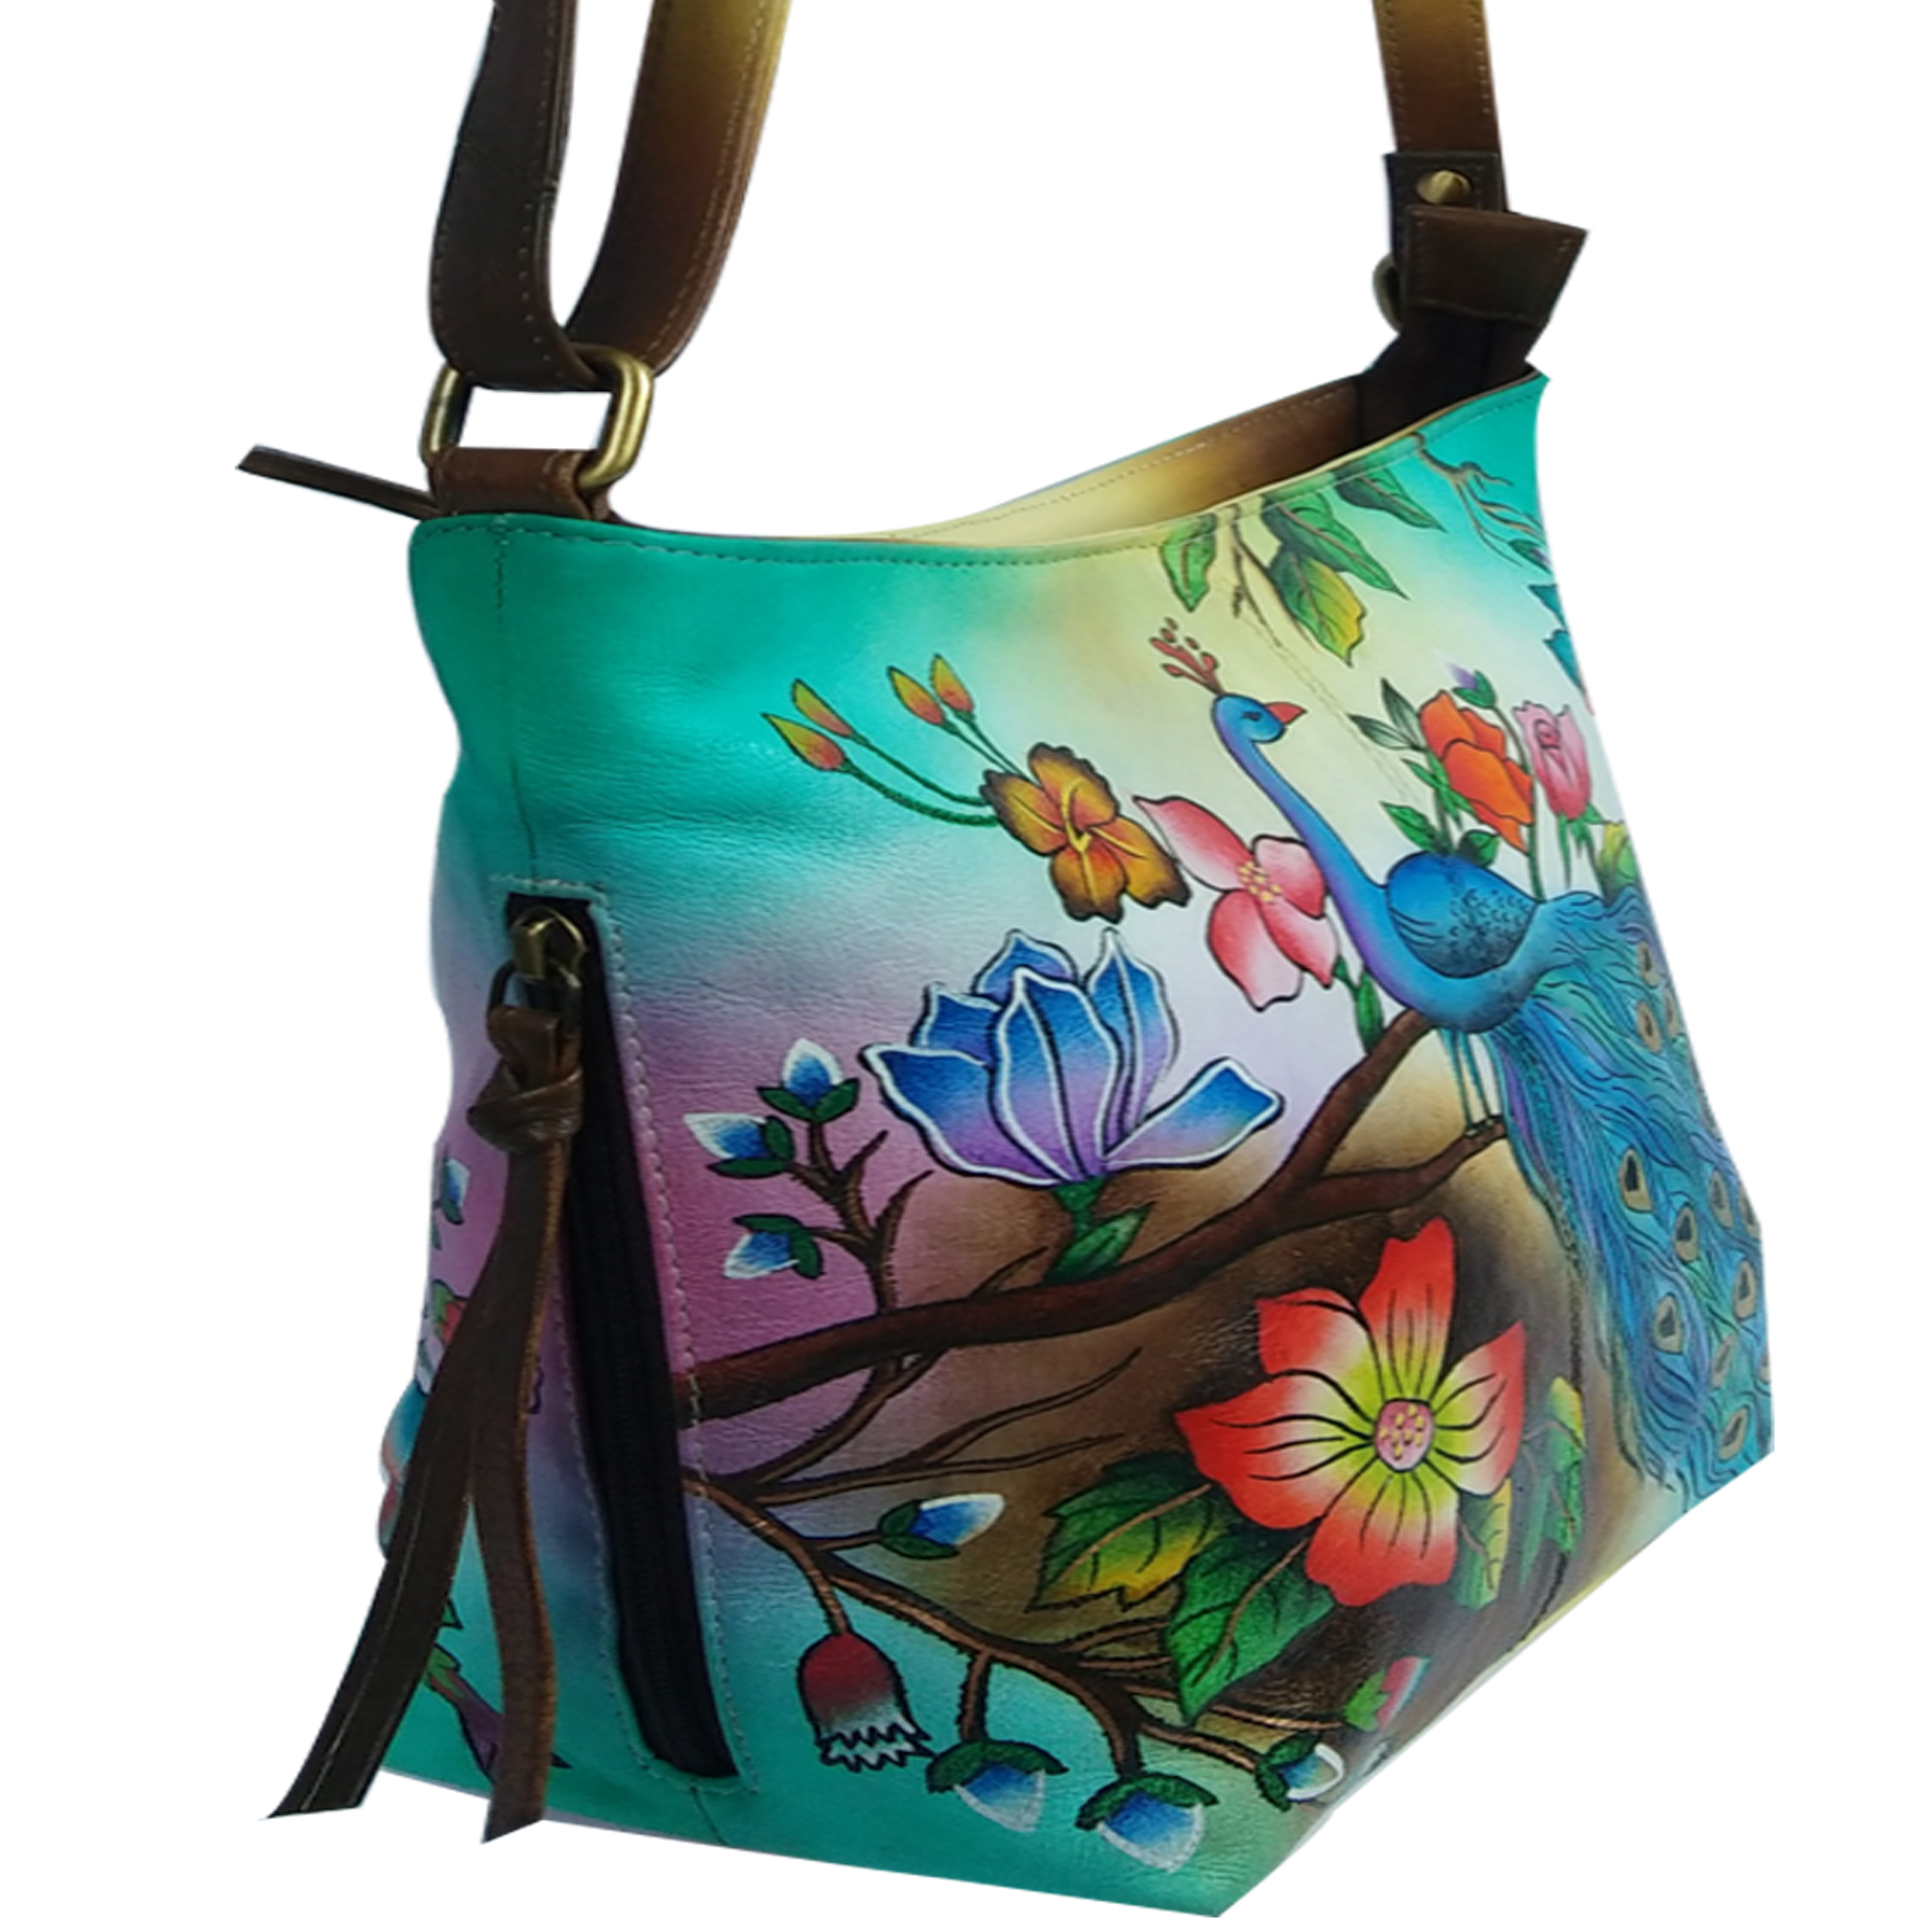 New Leather Hand Painted Sling Crossbody Shoulder Bag Design Sitting Peacock